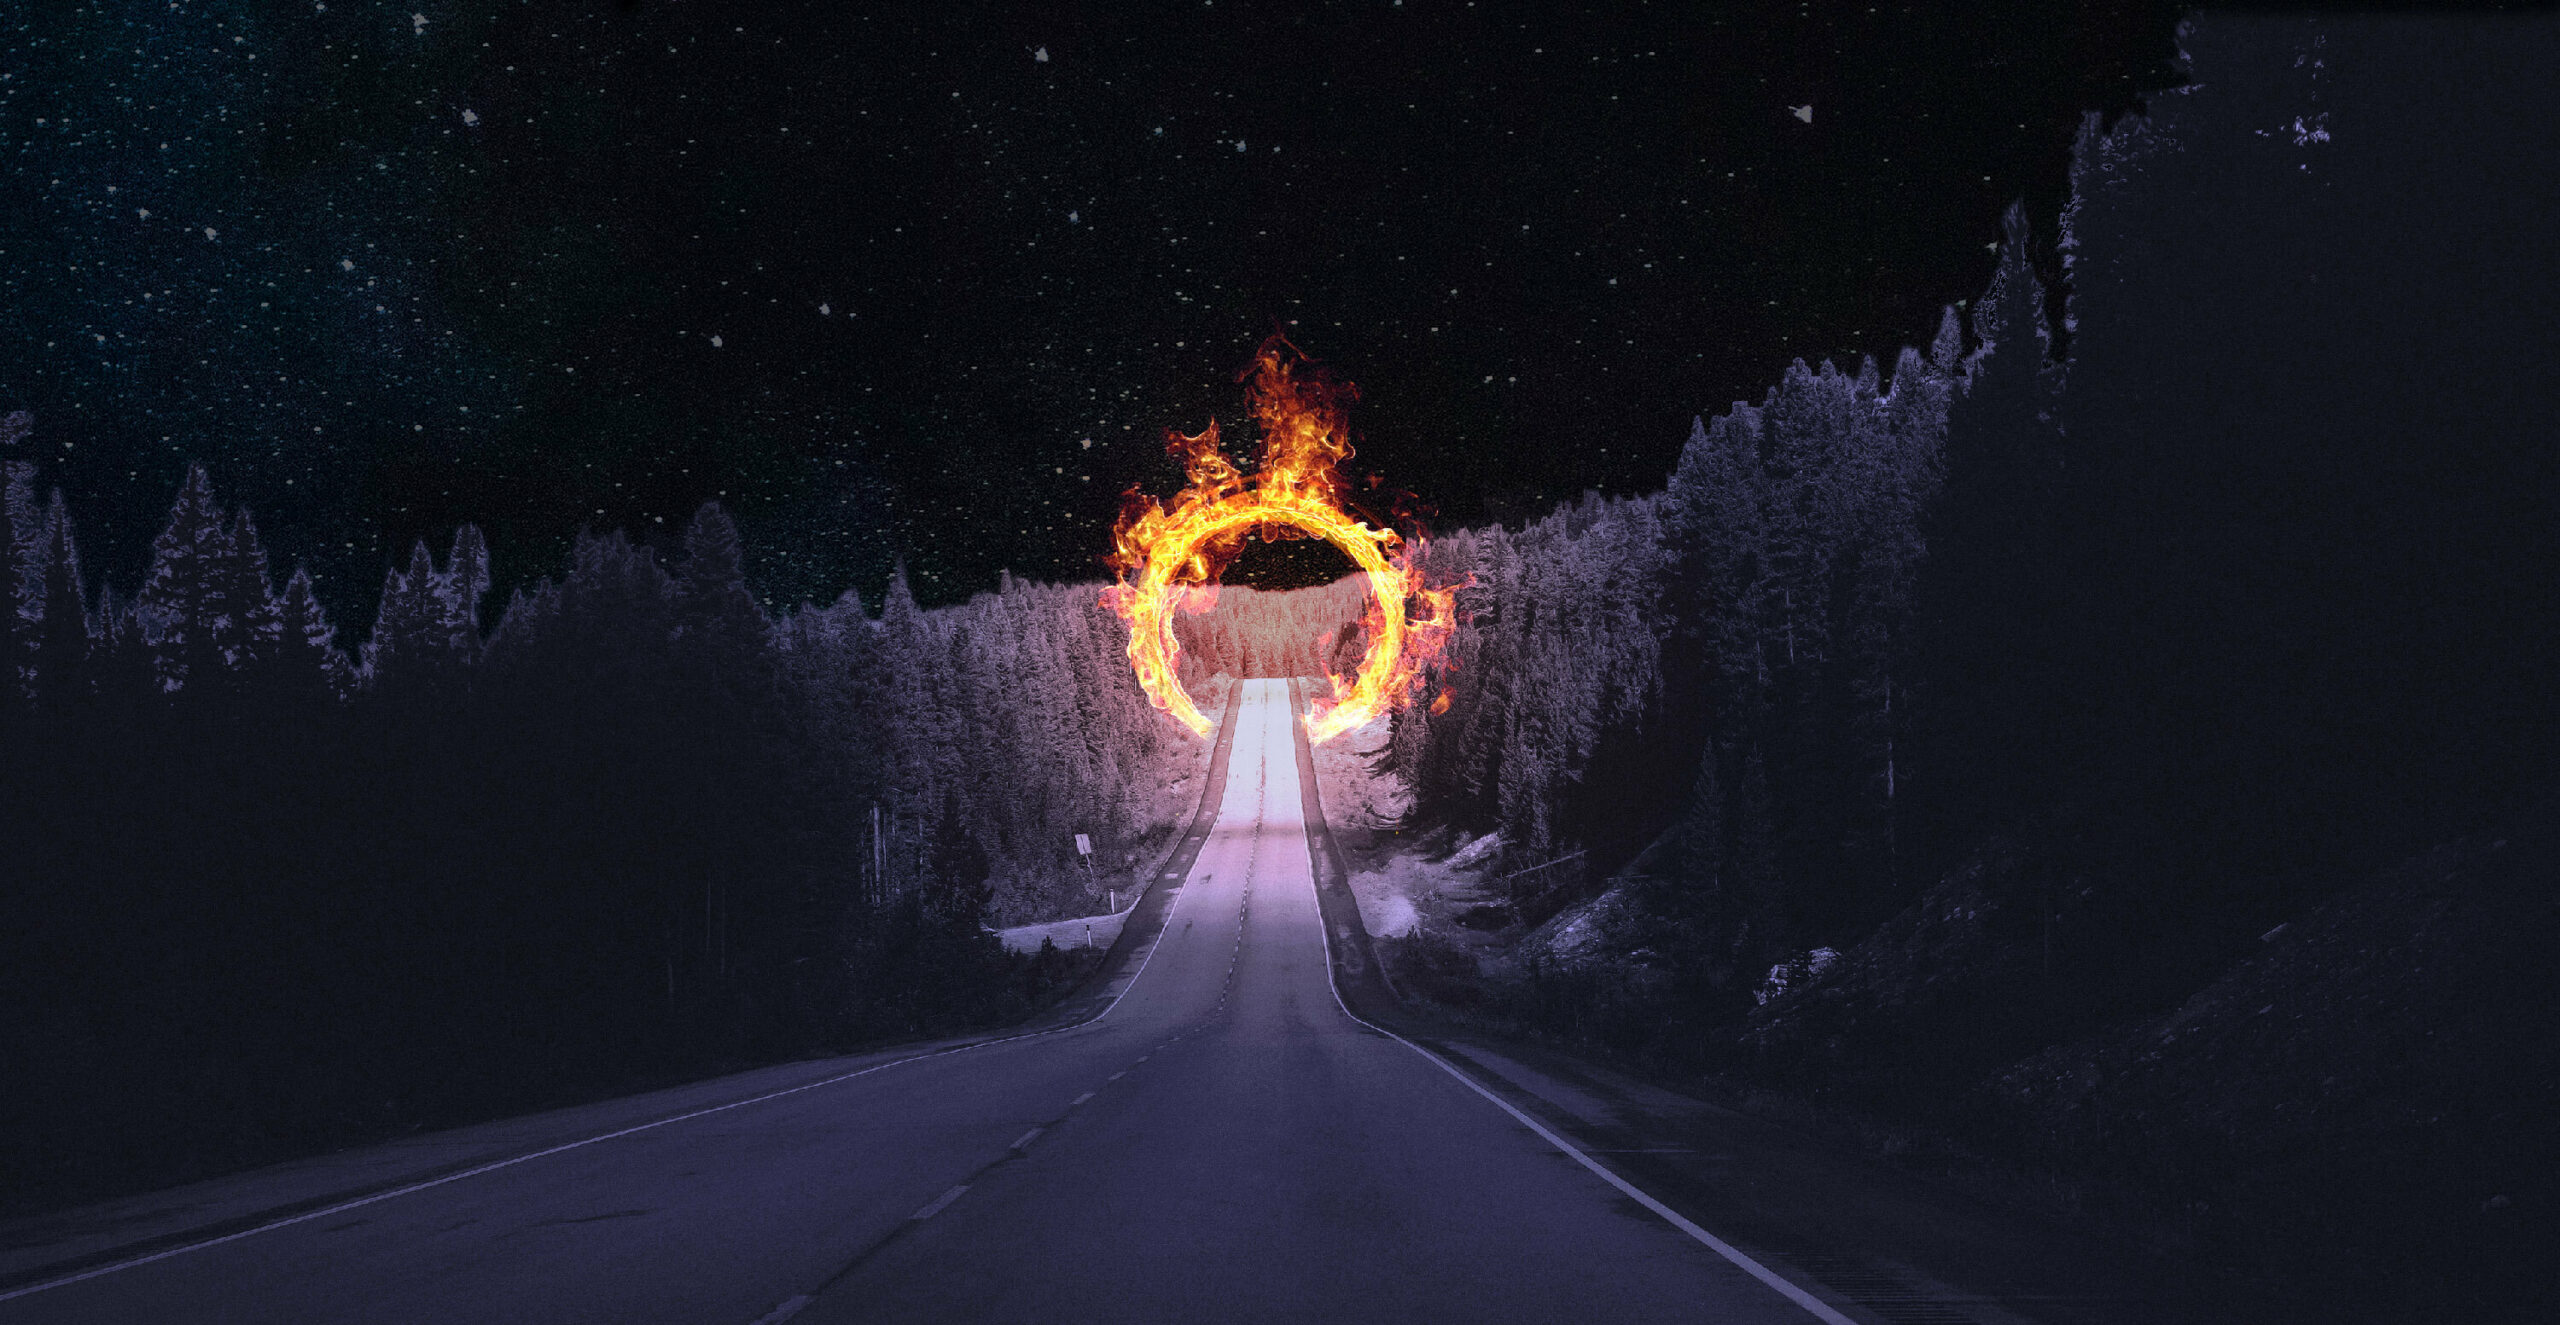 A road into the woods superimposed with an illustration of a ring of fire. A look at the 2022 Ontario election platforms shows all four parties want to bring mining and  infrastructure to the Ring of Fire region.